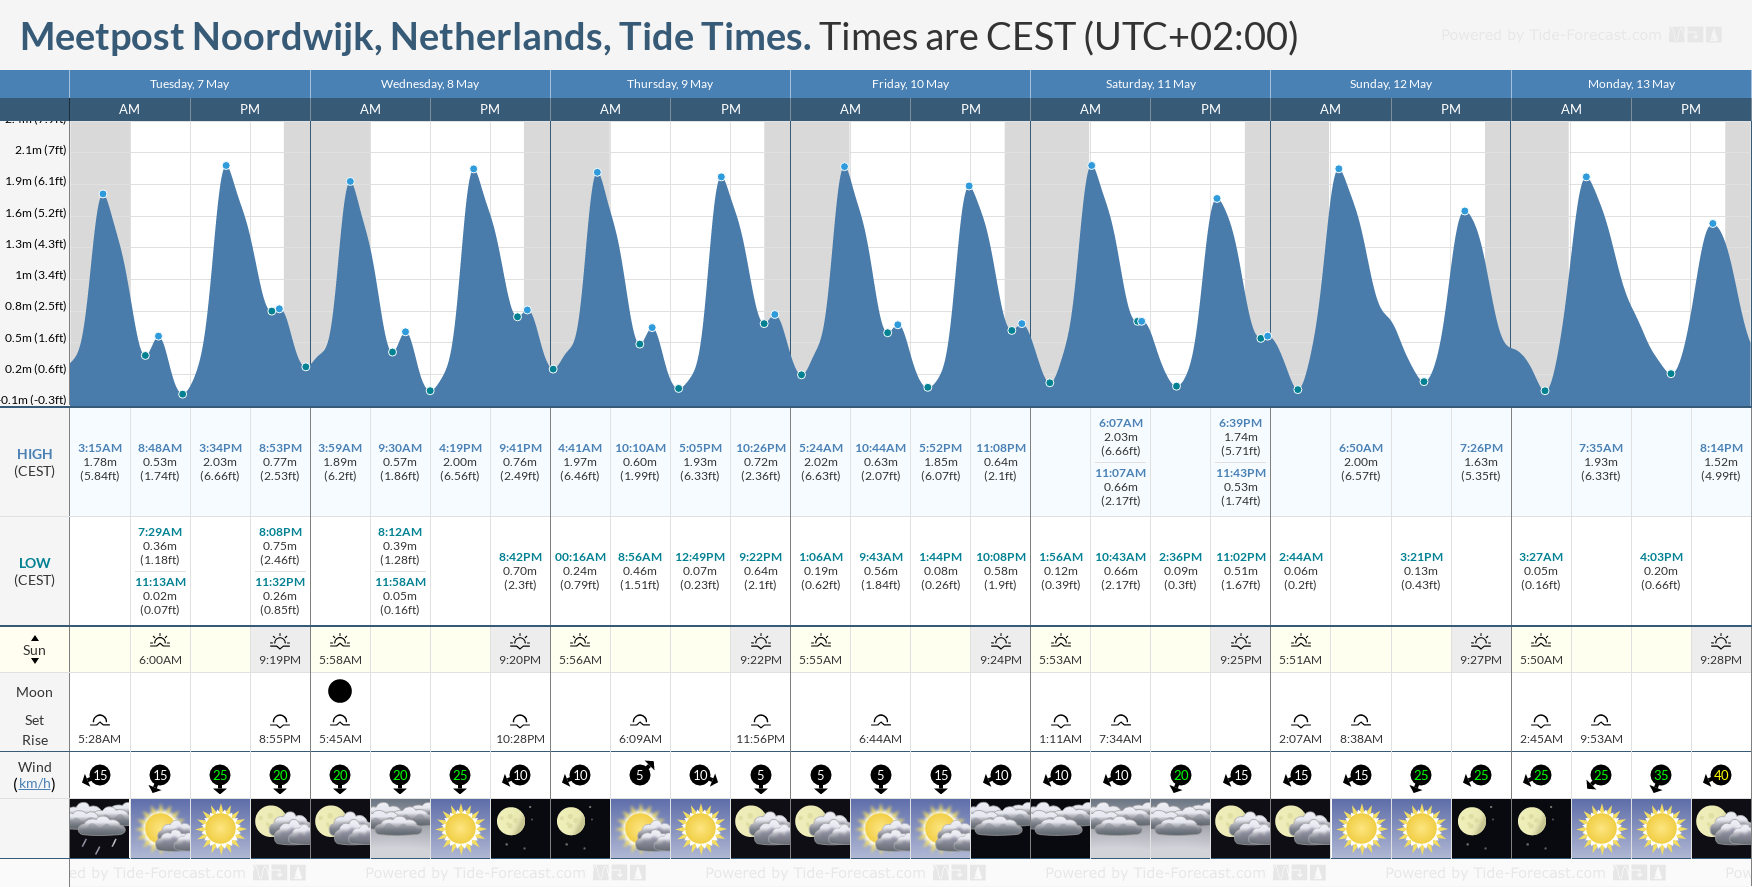 Meetpost Noordwijk, Netherlands Tide Chart including high and low tide tide times for the next 7 days